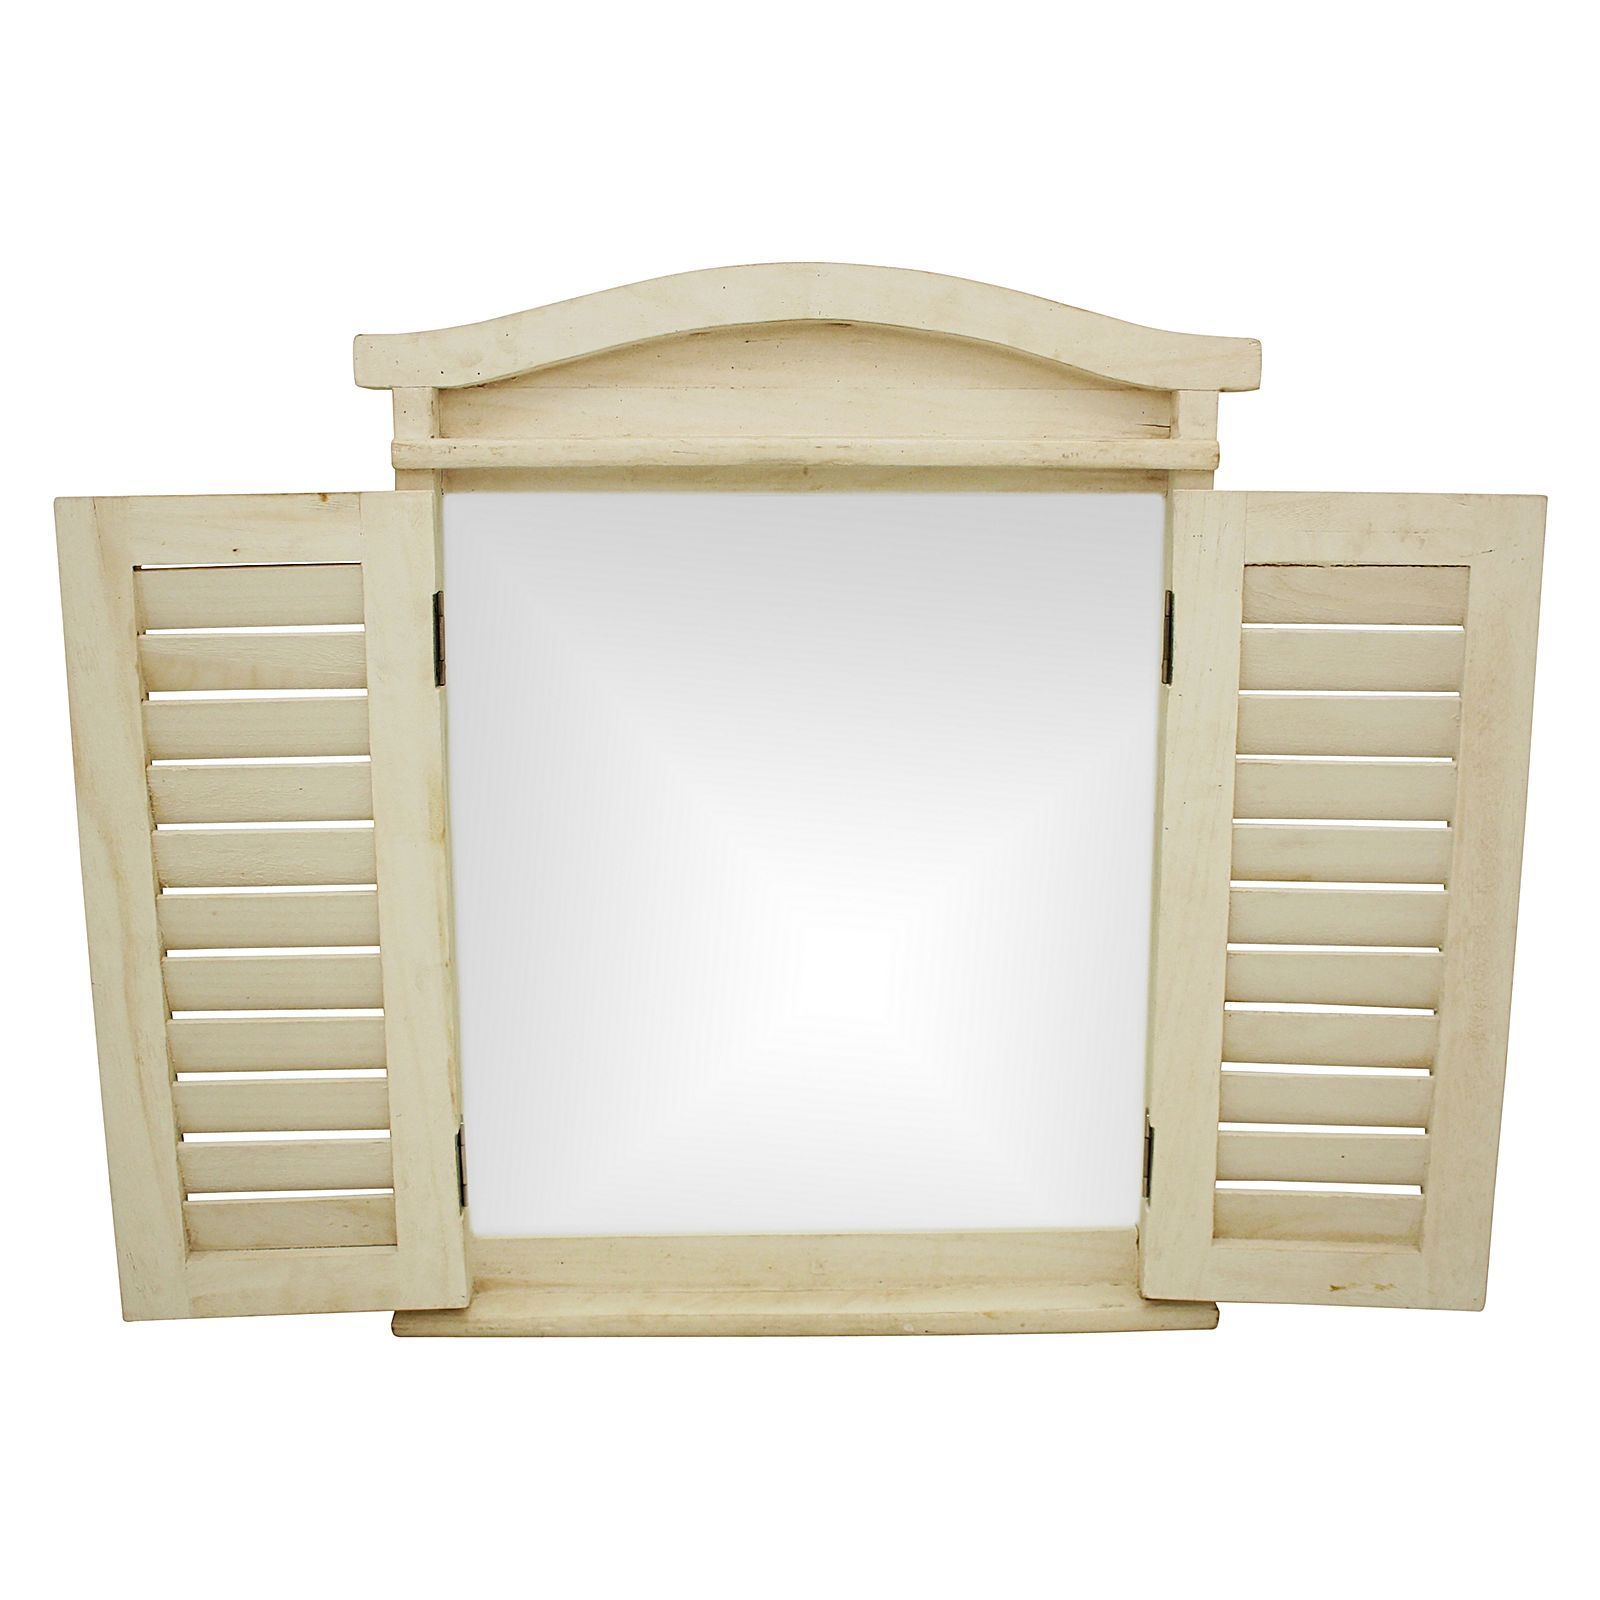 Shutter Frame Wall Mirror, Cream With Window Cream Wood Wall Mirrors (View 3 of 20)